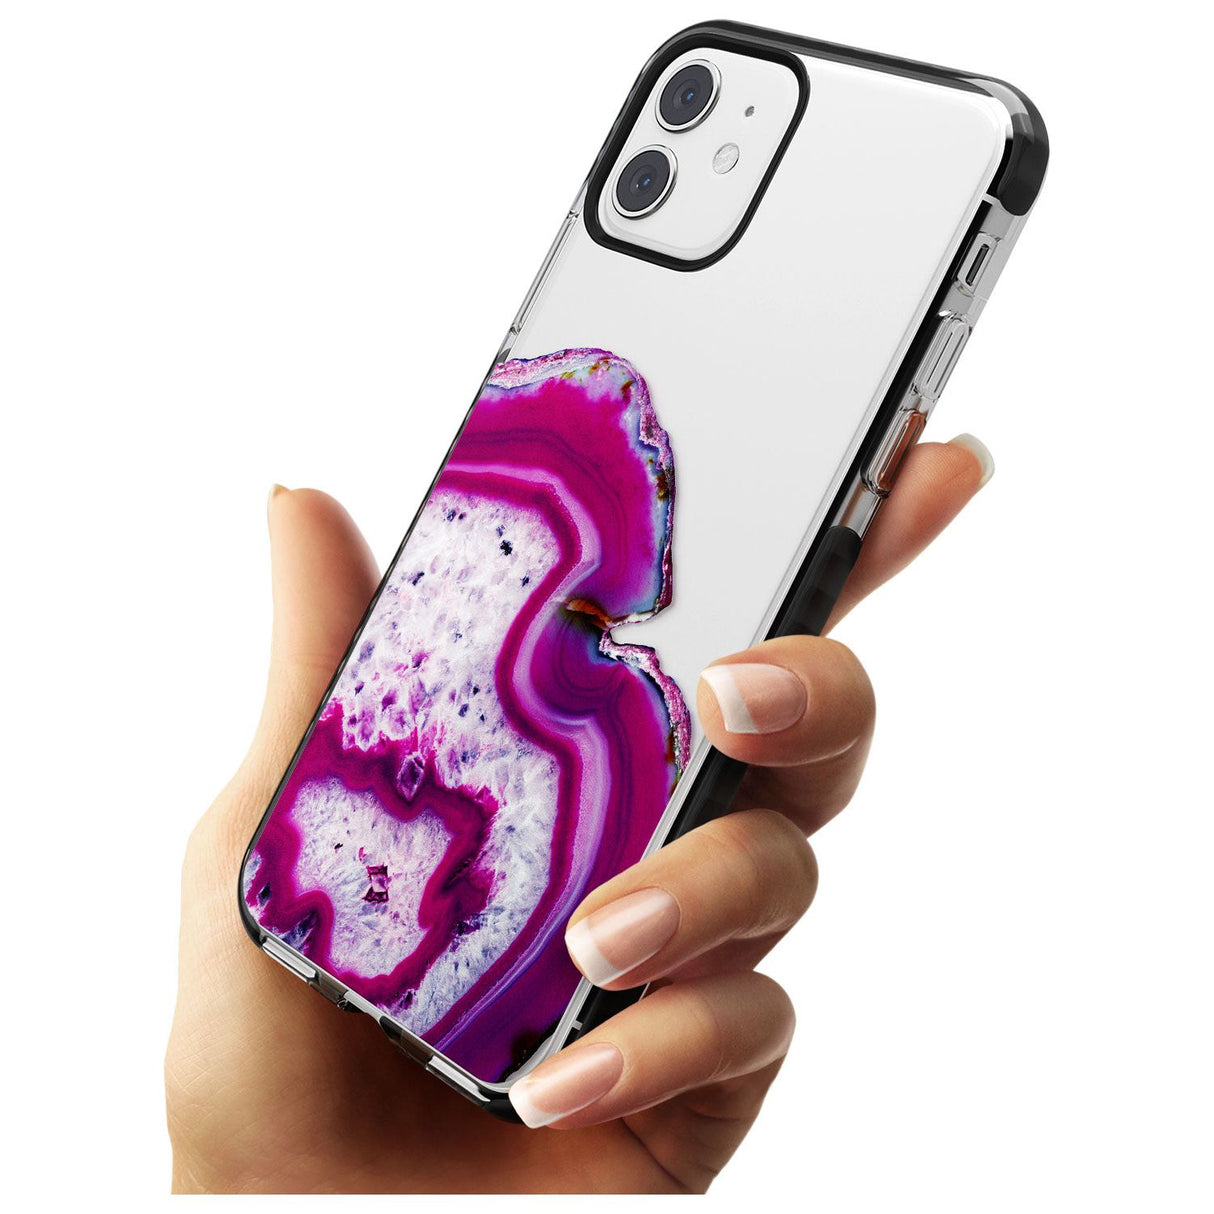 Violet & White Swirl Agate Crystal Clear Design Black Impact Phone Case for iPhone 11